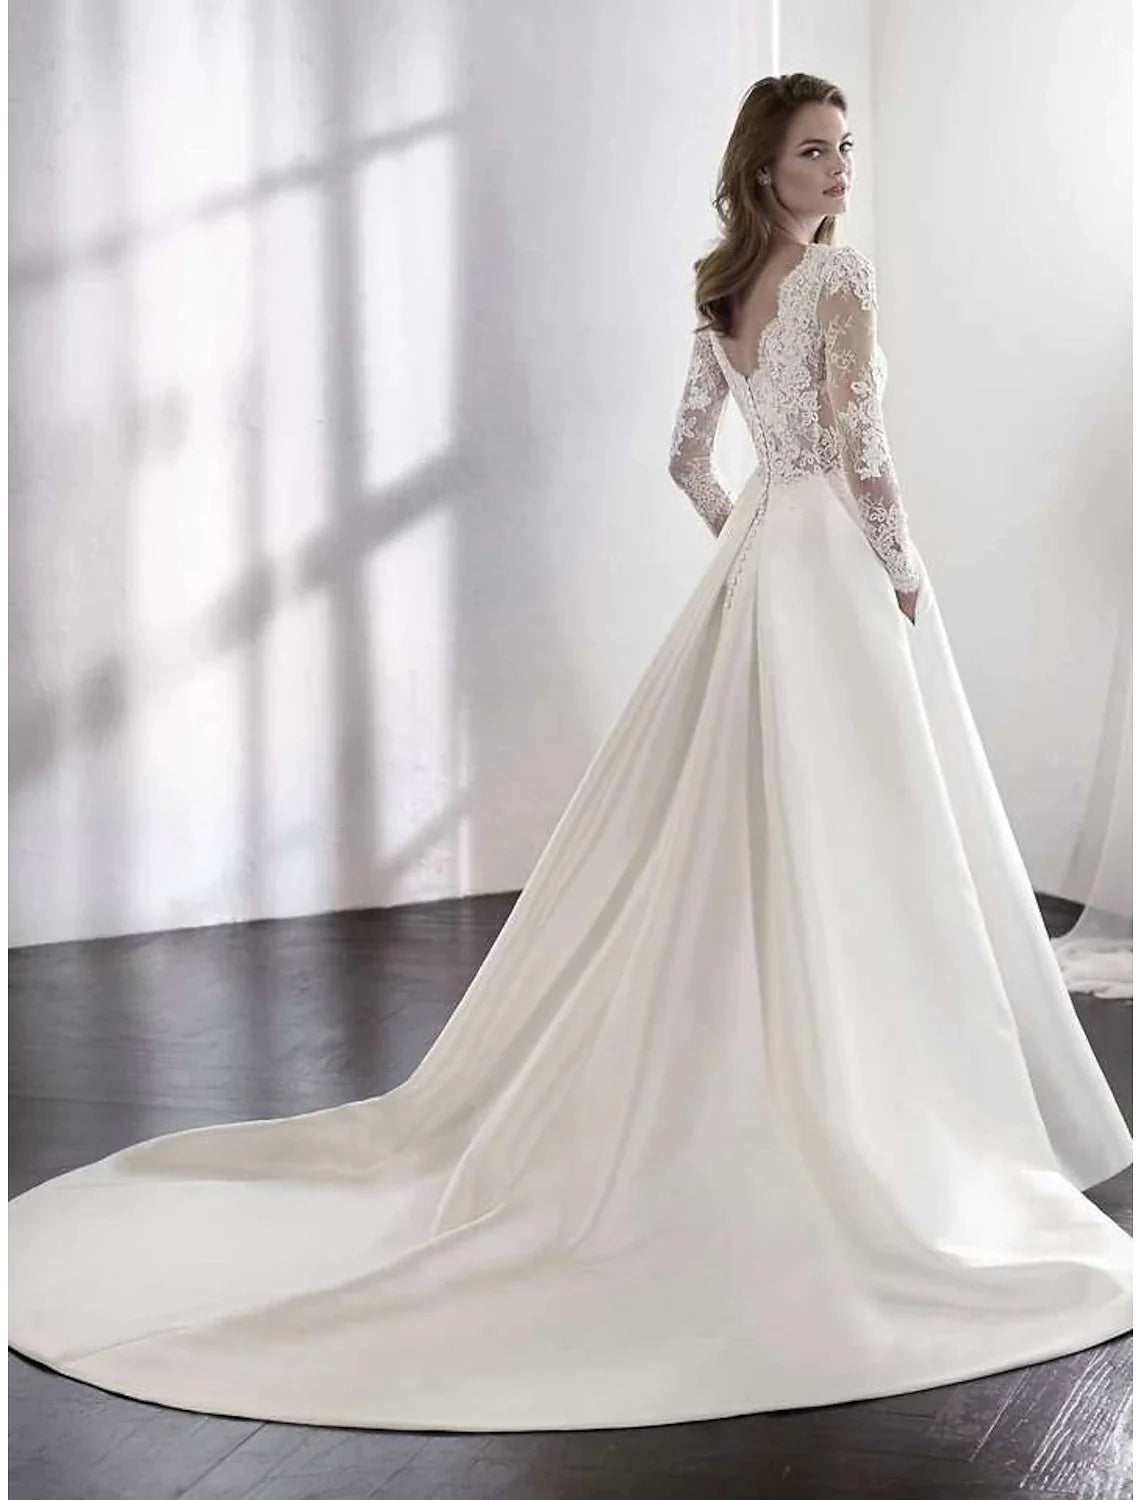 Beach Formal Wedding Dresses Chapel Train A-Line Long Sleeve Illusion Neck Satin With Lace Pleats